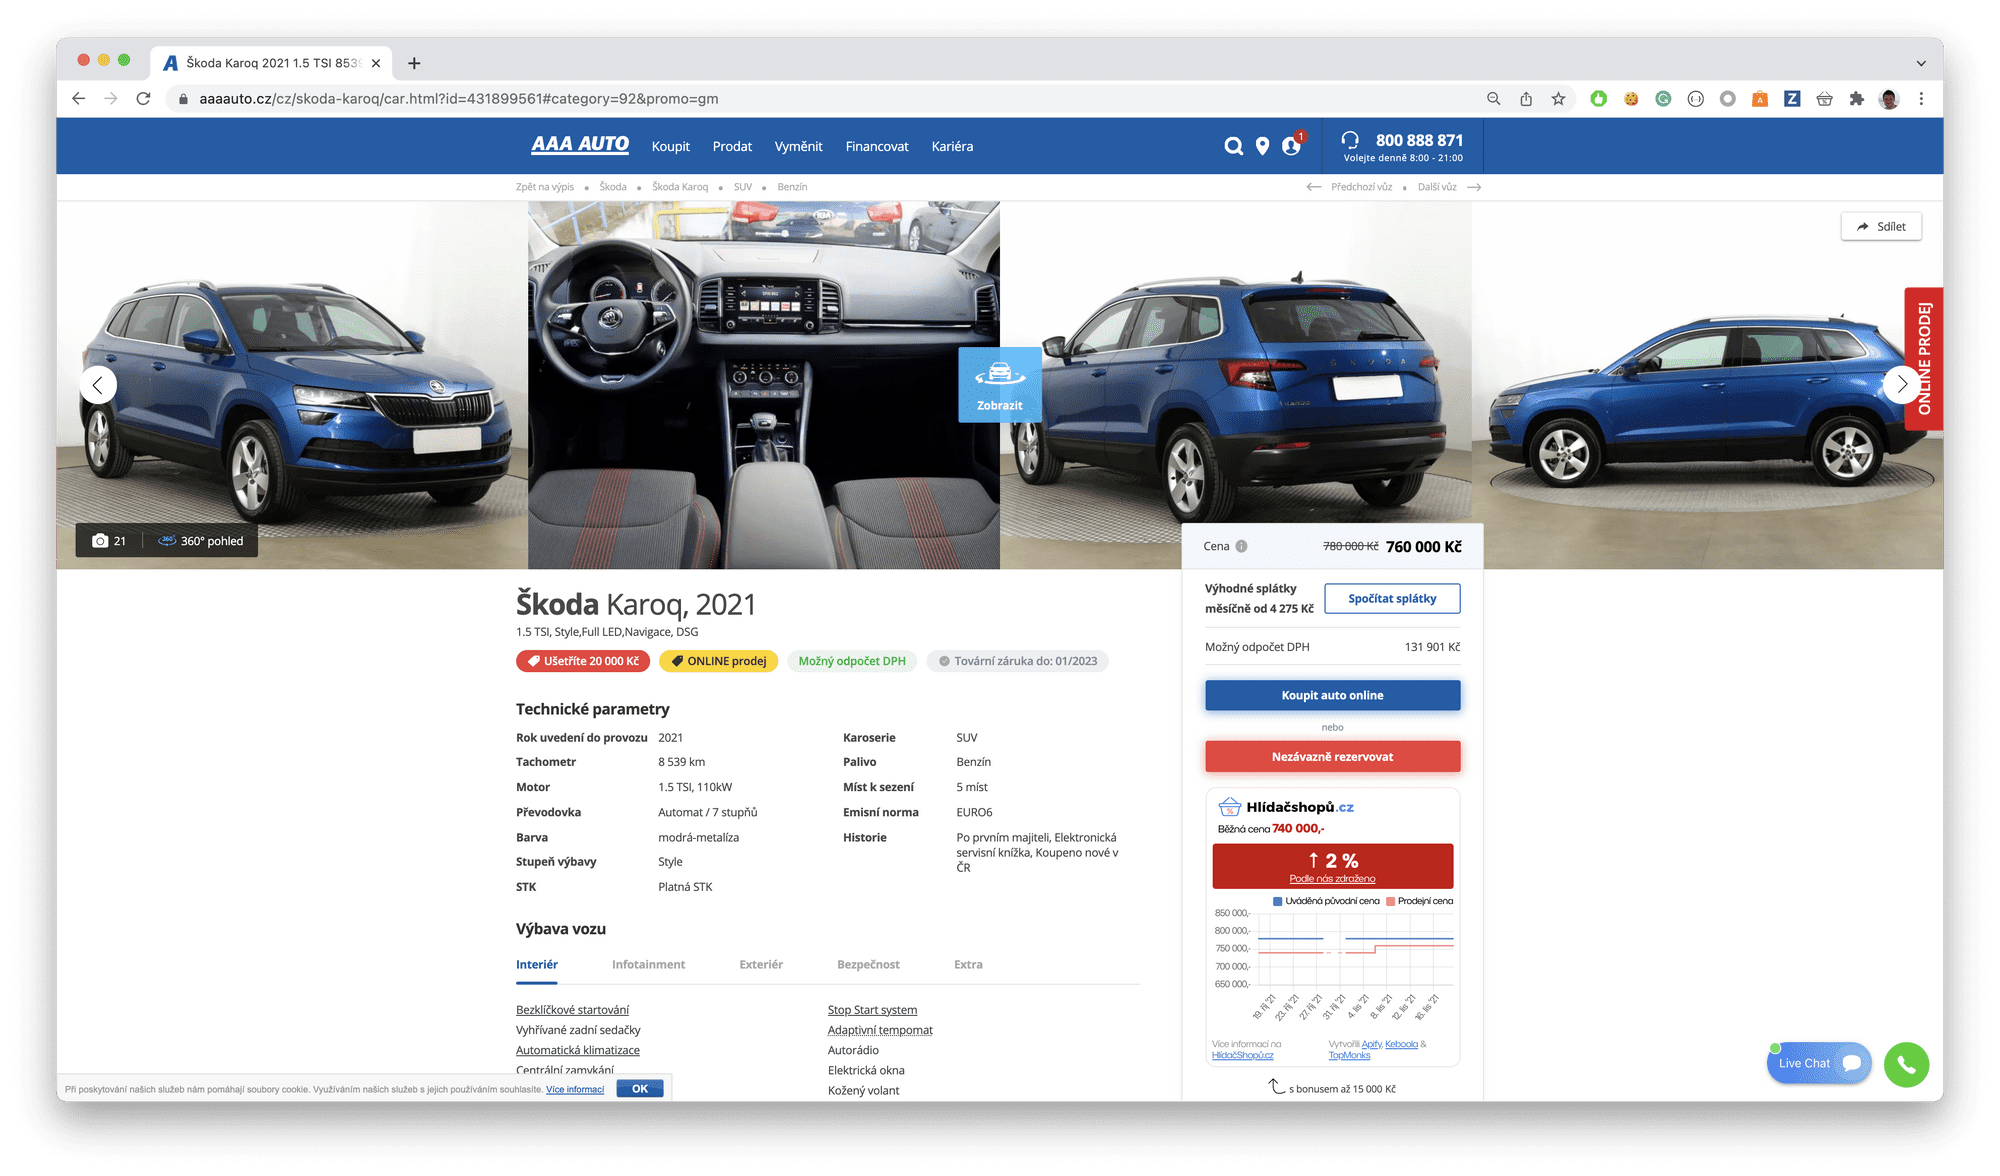 screenshot of a car on sale at aaaauto.cz from 780,000 CZK to 760,000 CZK with Hlídač shopů showing a 2% increase